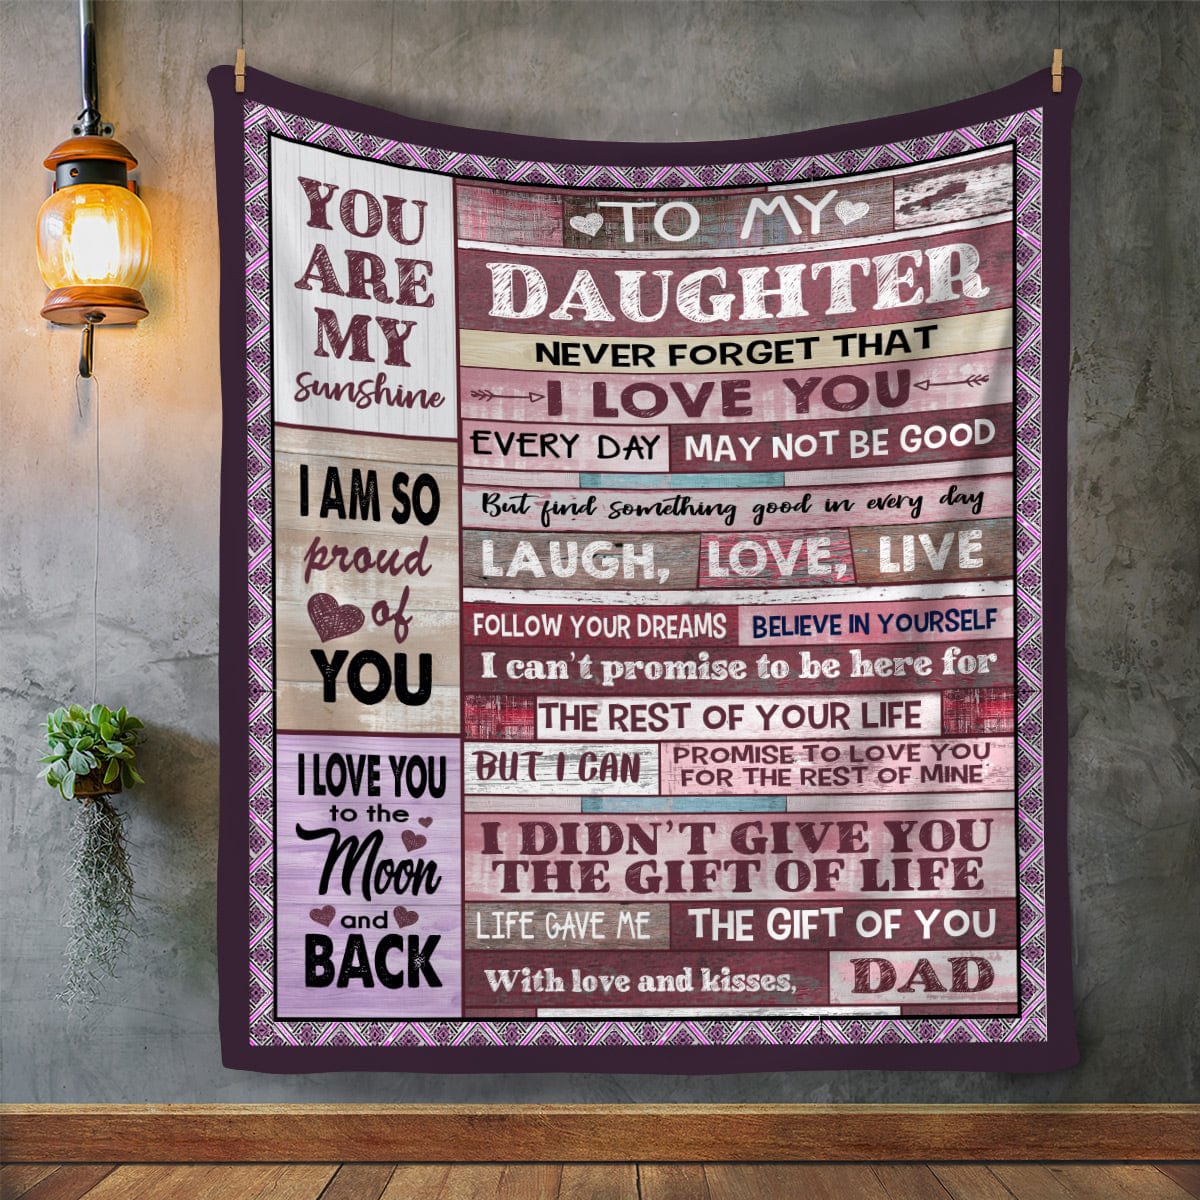 To My Daughter Love Dad Patchwork Blanket - Gift to Daughter from Dad